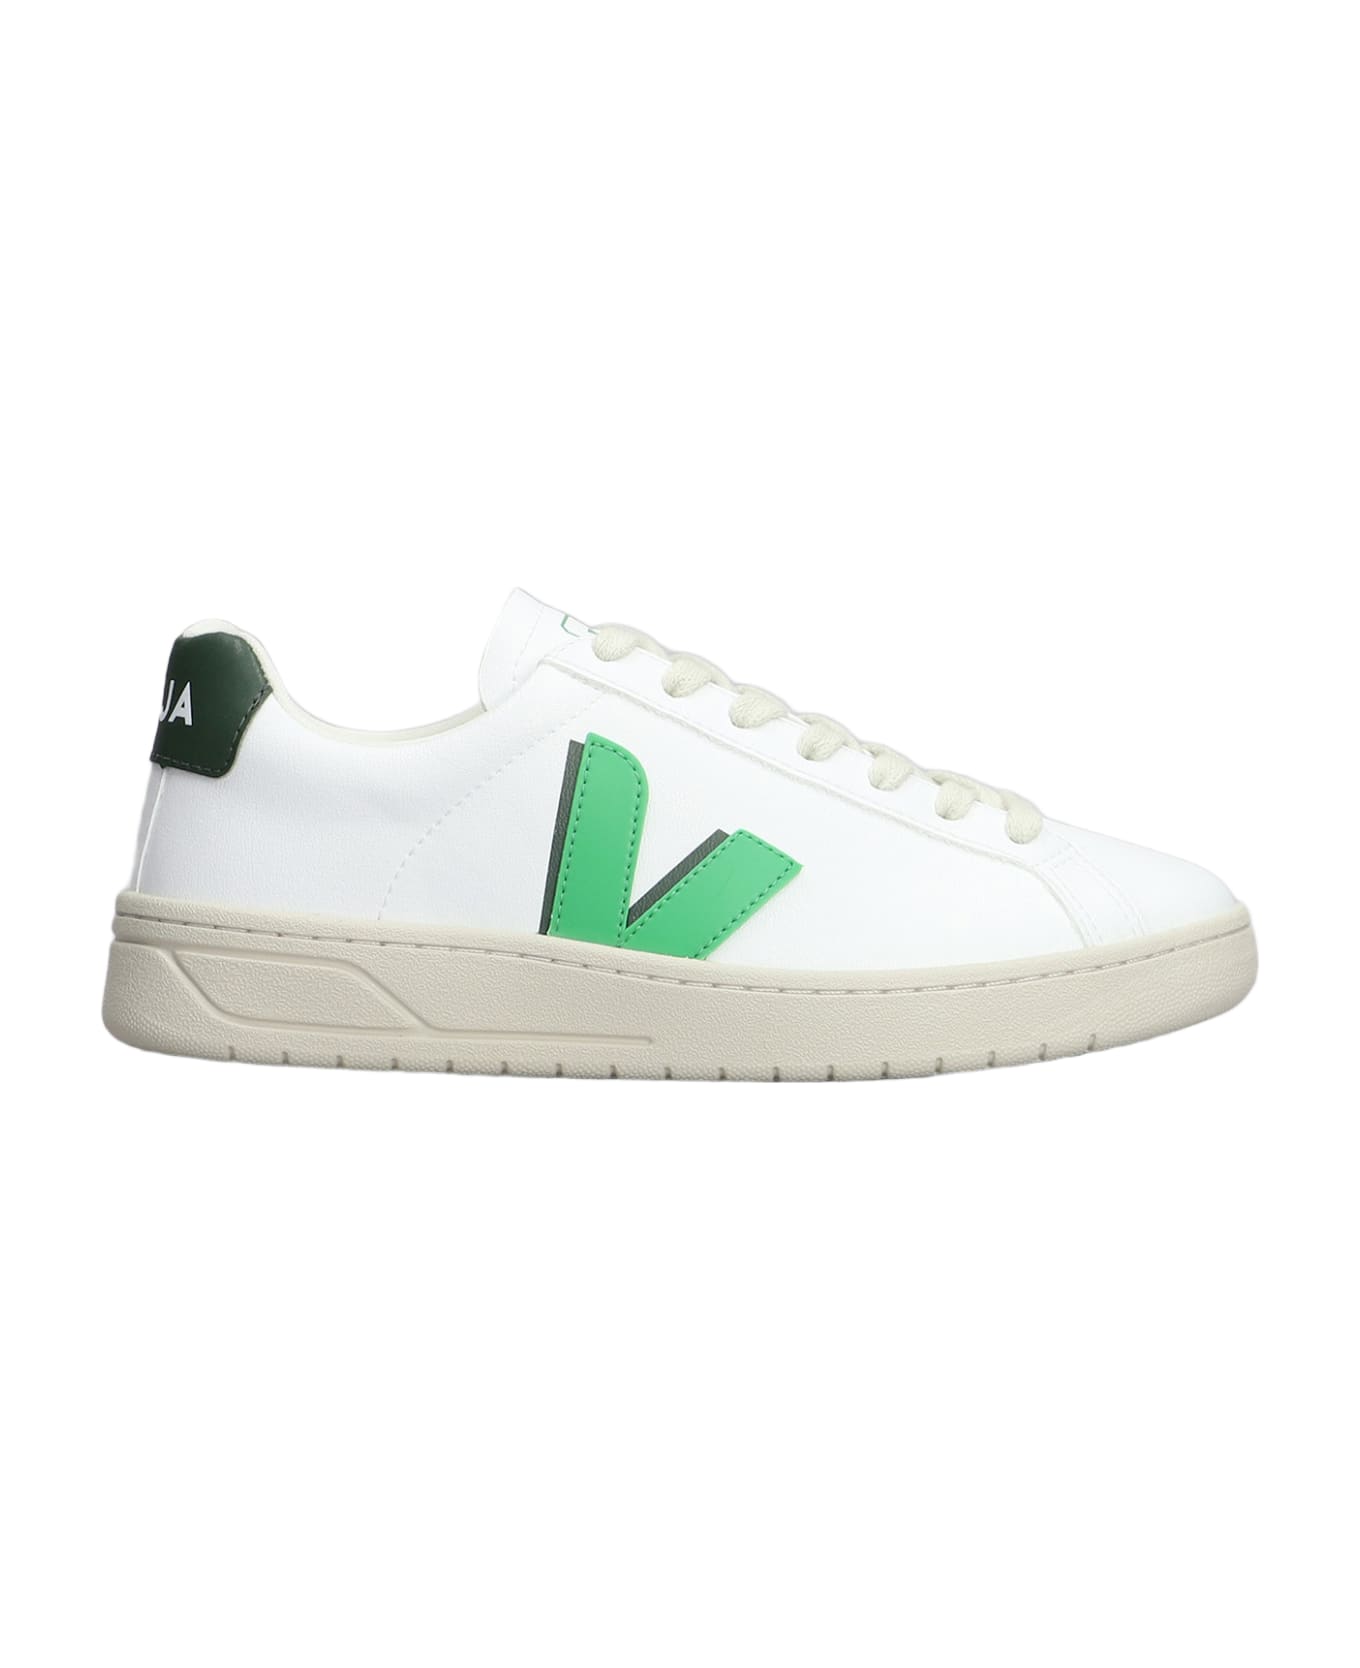 Veja Urca Sneakers In White Leather - white スニーカー